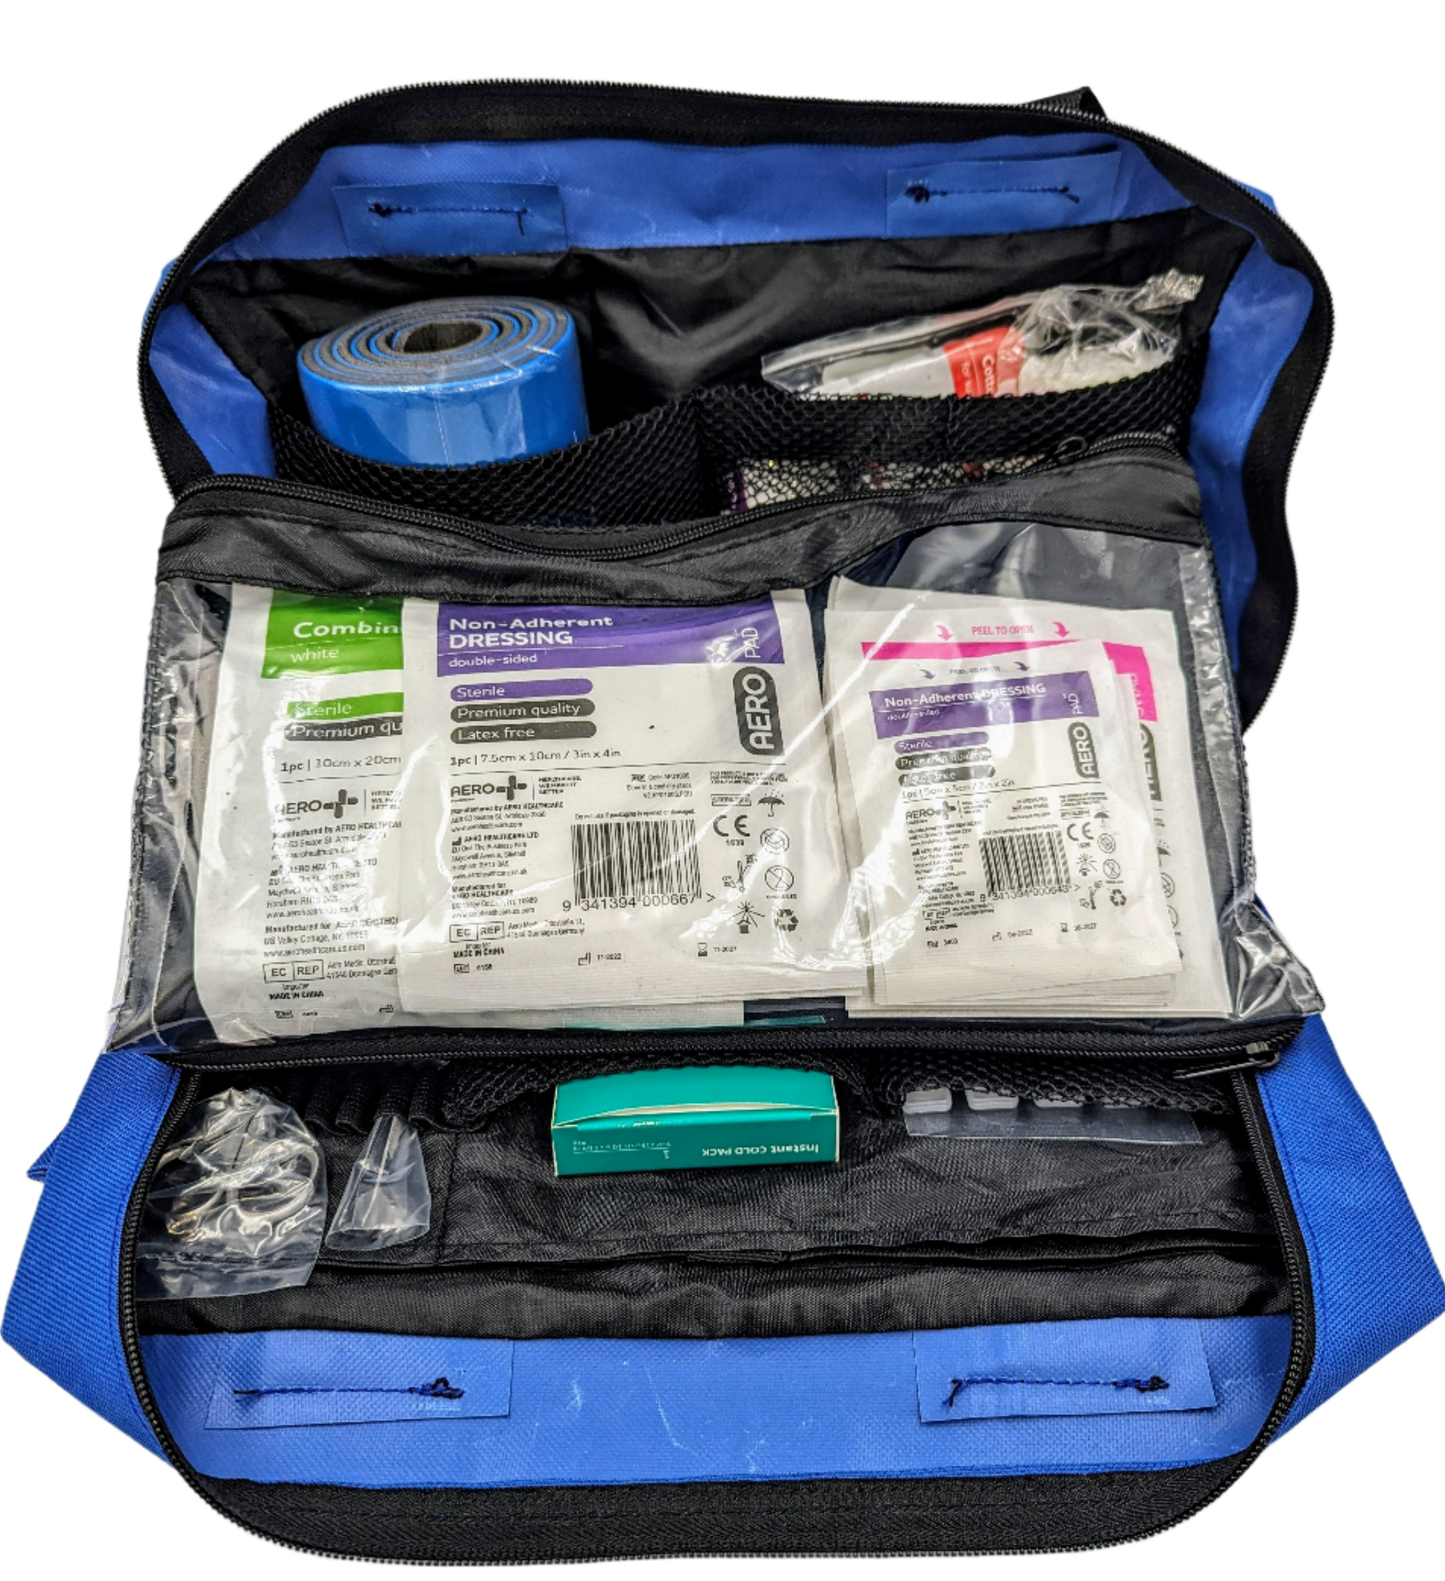 4WD Survival First Aid Kit-First Aid Kit-Assurance Training and Sales-Assurance Training and Sales